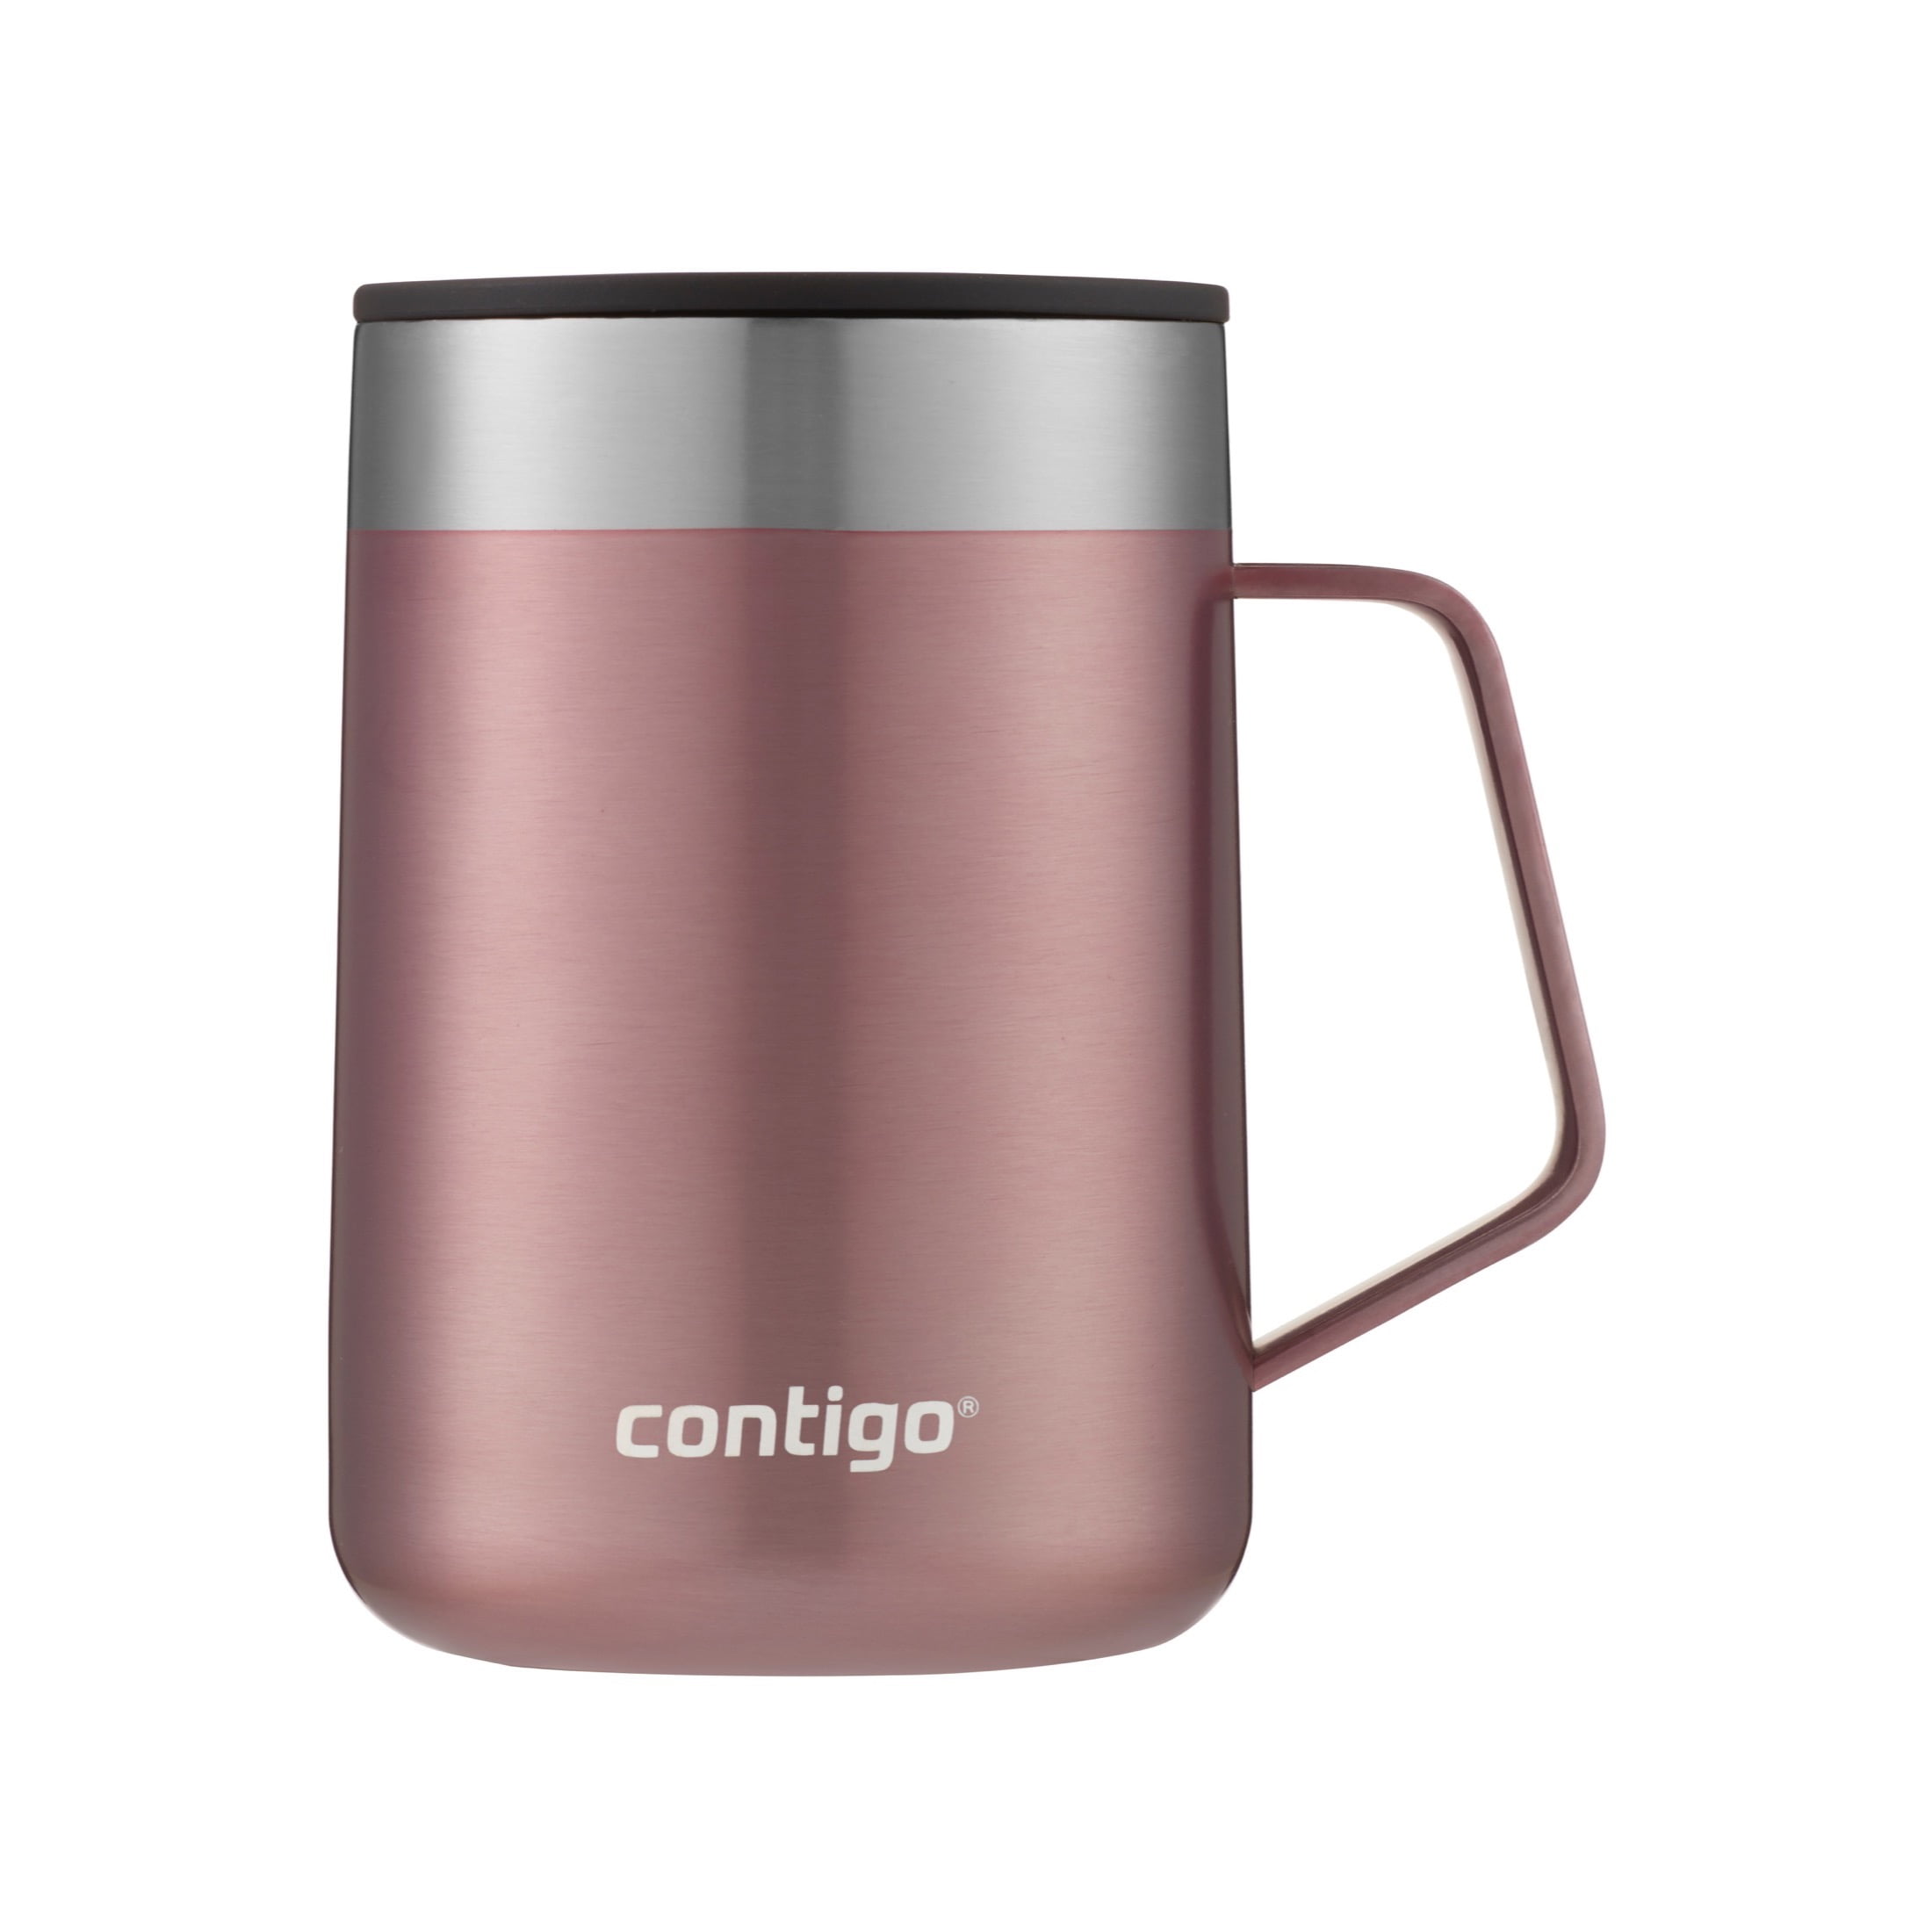 Contigo Party Cup Stainless Steel, 16oz - Red – Capital Books and Wellness